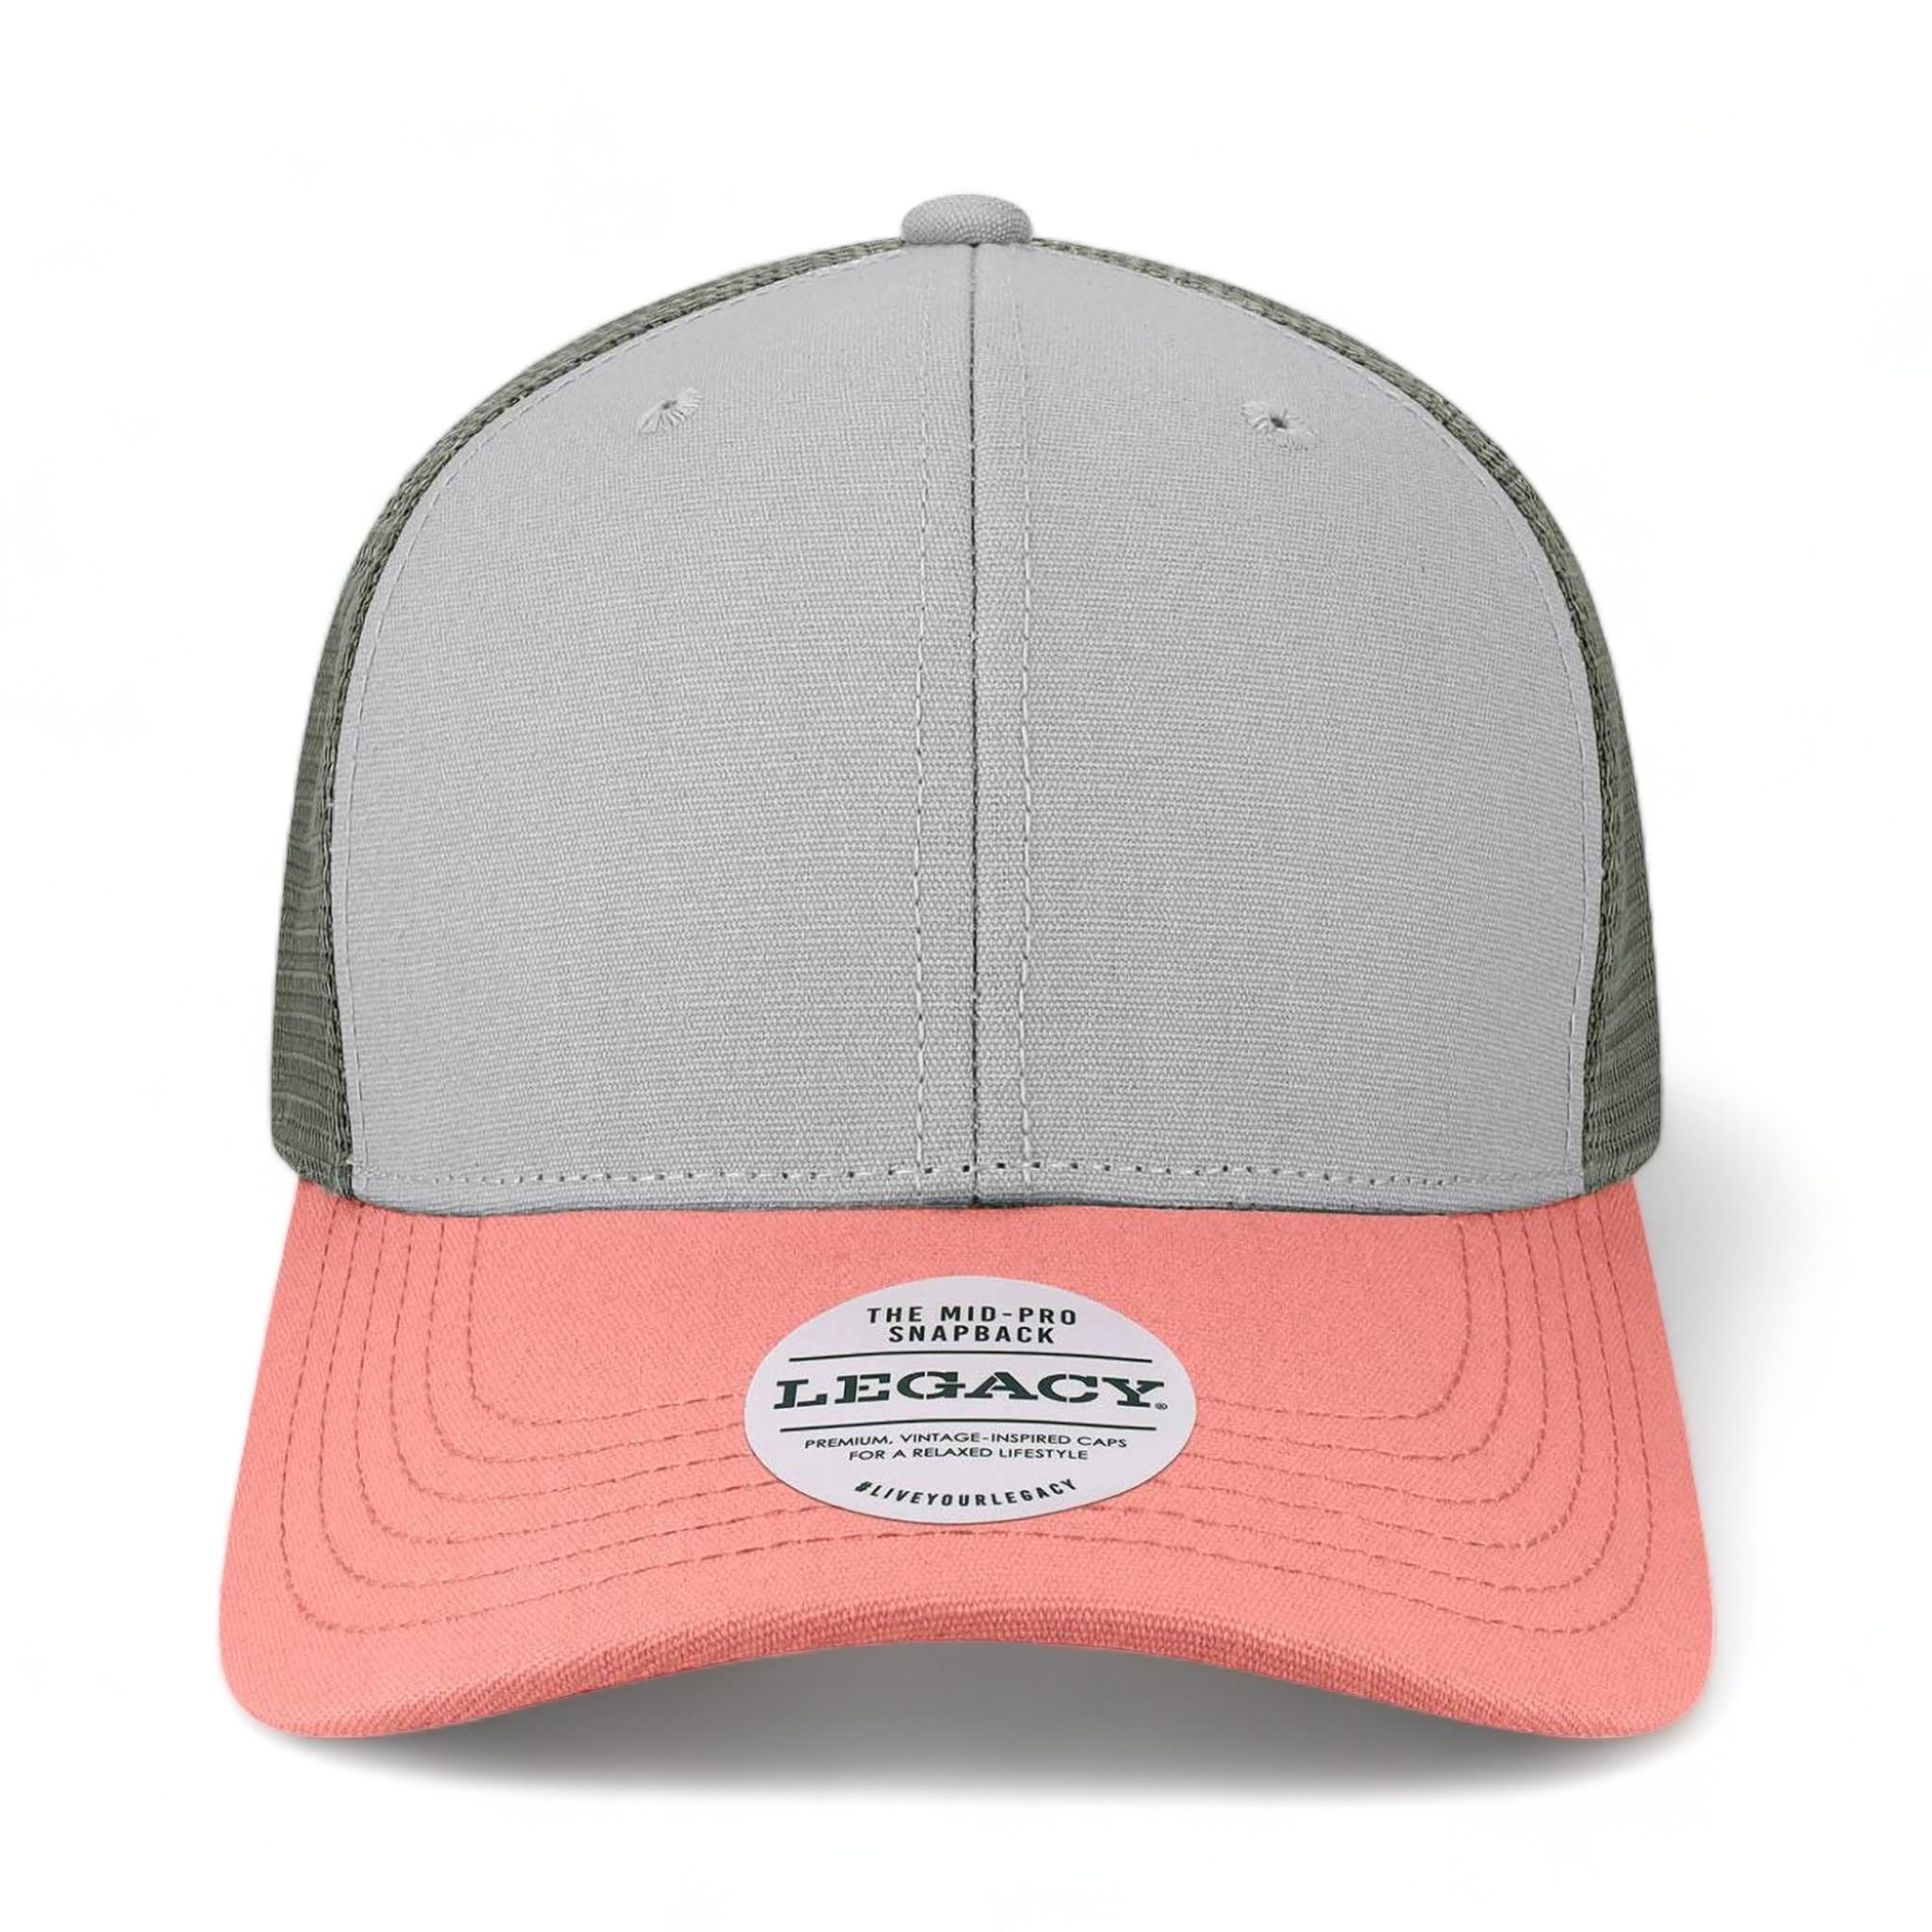 Front view of LEGACY MPS custom hat in light grey, salmon and dark grey